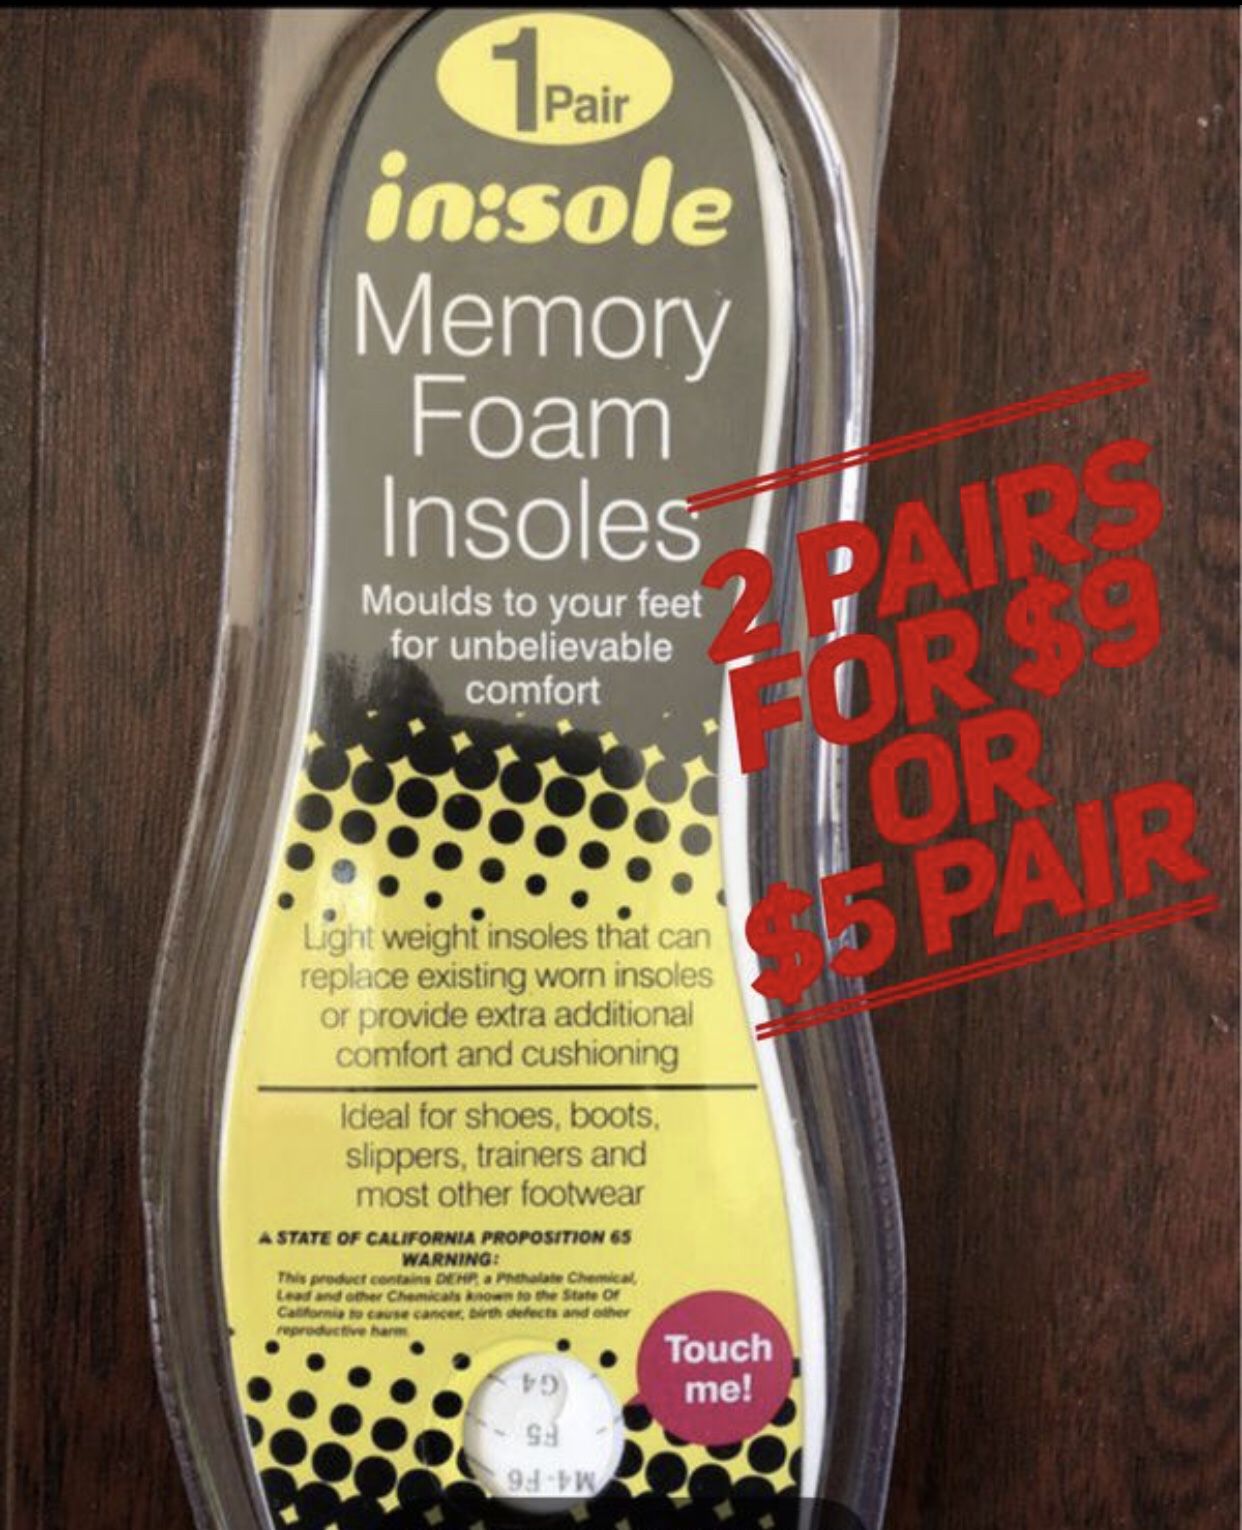 Memory Foam Insoles 🦶 Molds to your foot🦶for Comfort Walking🚶 Cut to fit any shoes Men or Women $5 pair or 2 for $9